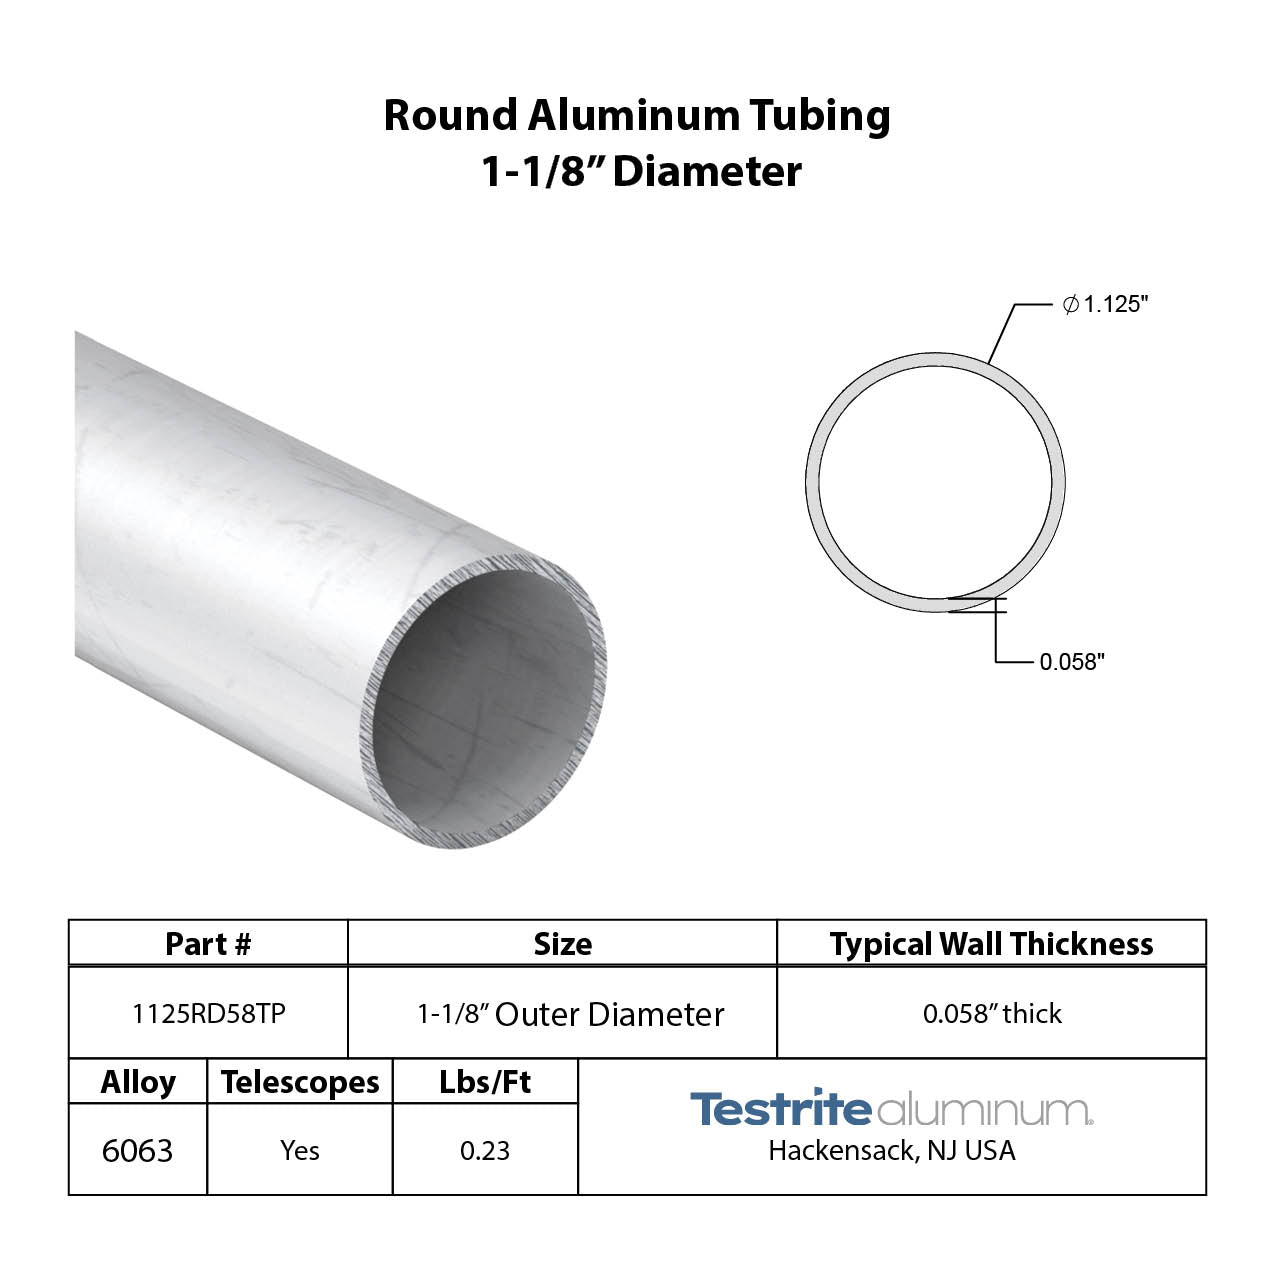 Specifications for 1-1/8" OD x .058" Wall Drawn Round Aluminum Tubing Telescopic, 1.125" OD x .058" wall round aluminum tube, designed to fit inside our 1-1/4" OD x .058" wall tube and to accept our 1" OD x .058" Wall tube inside of it, all telescoping compatible, 16 gauge 1-1/8" aluminum tube